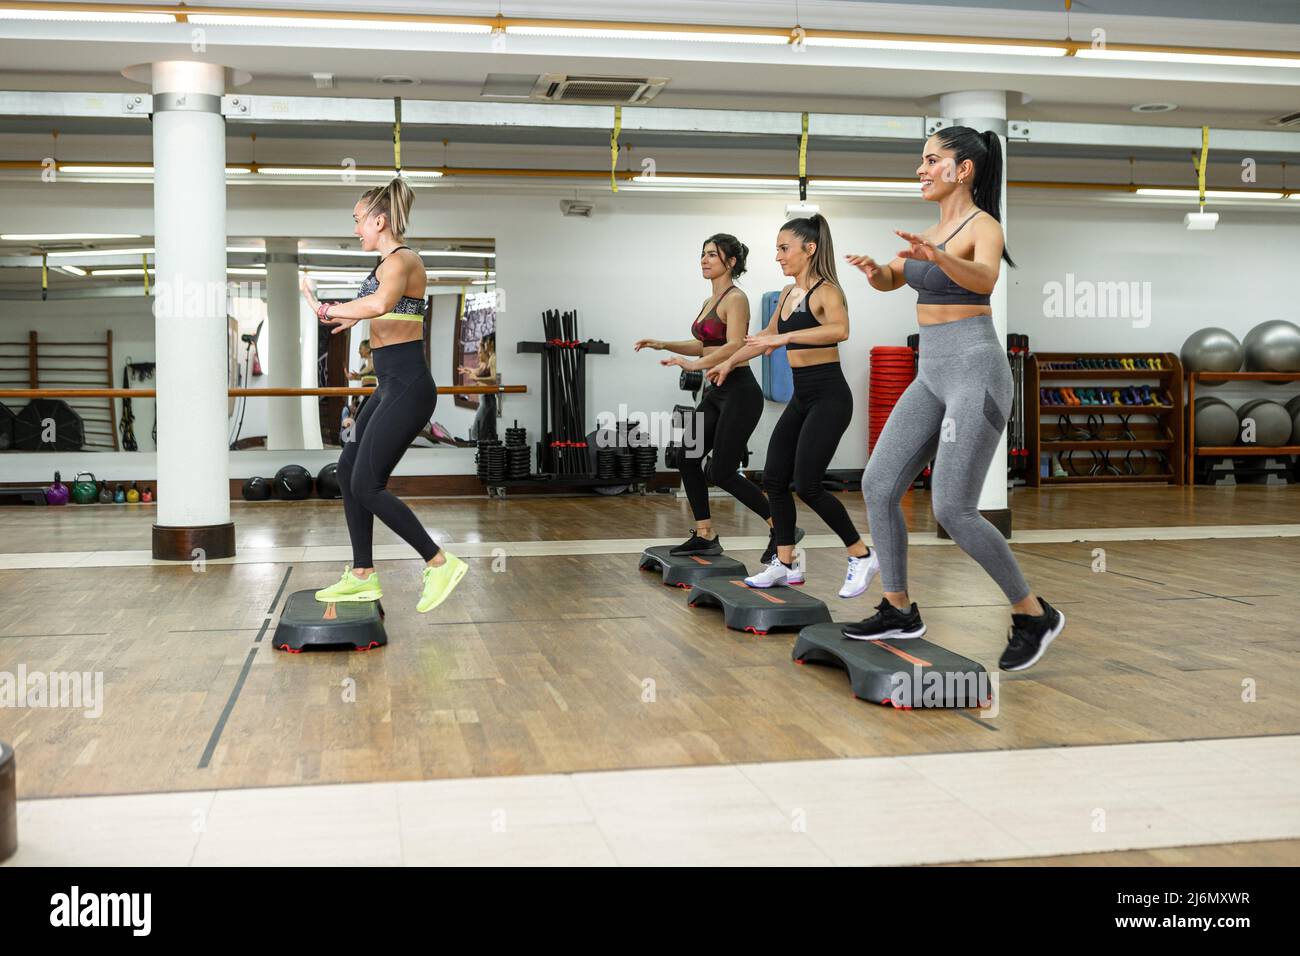 Group of female athletes and trainer smiling and doing exercise on steppers during aerobic workout in light gym. Stock Photo